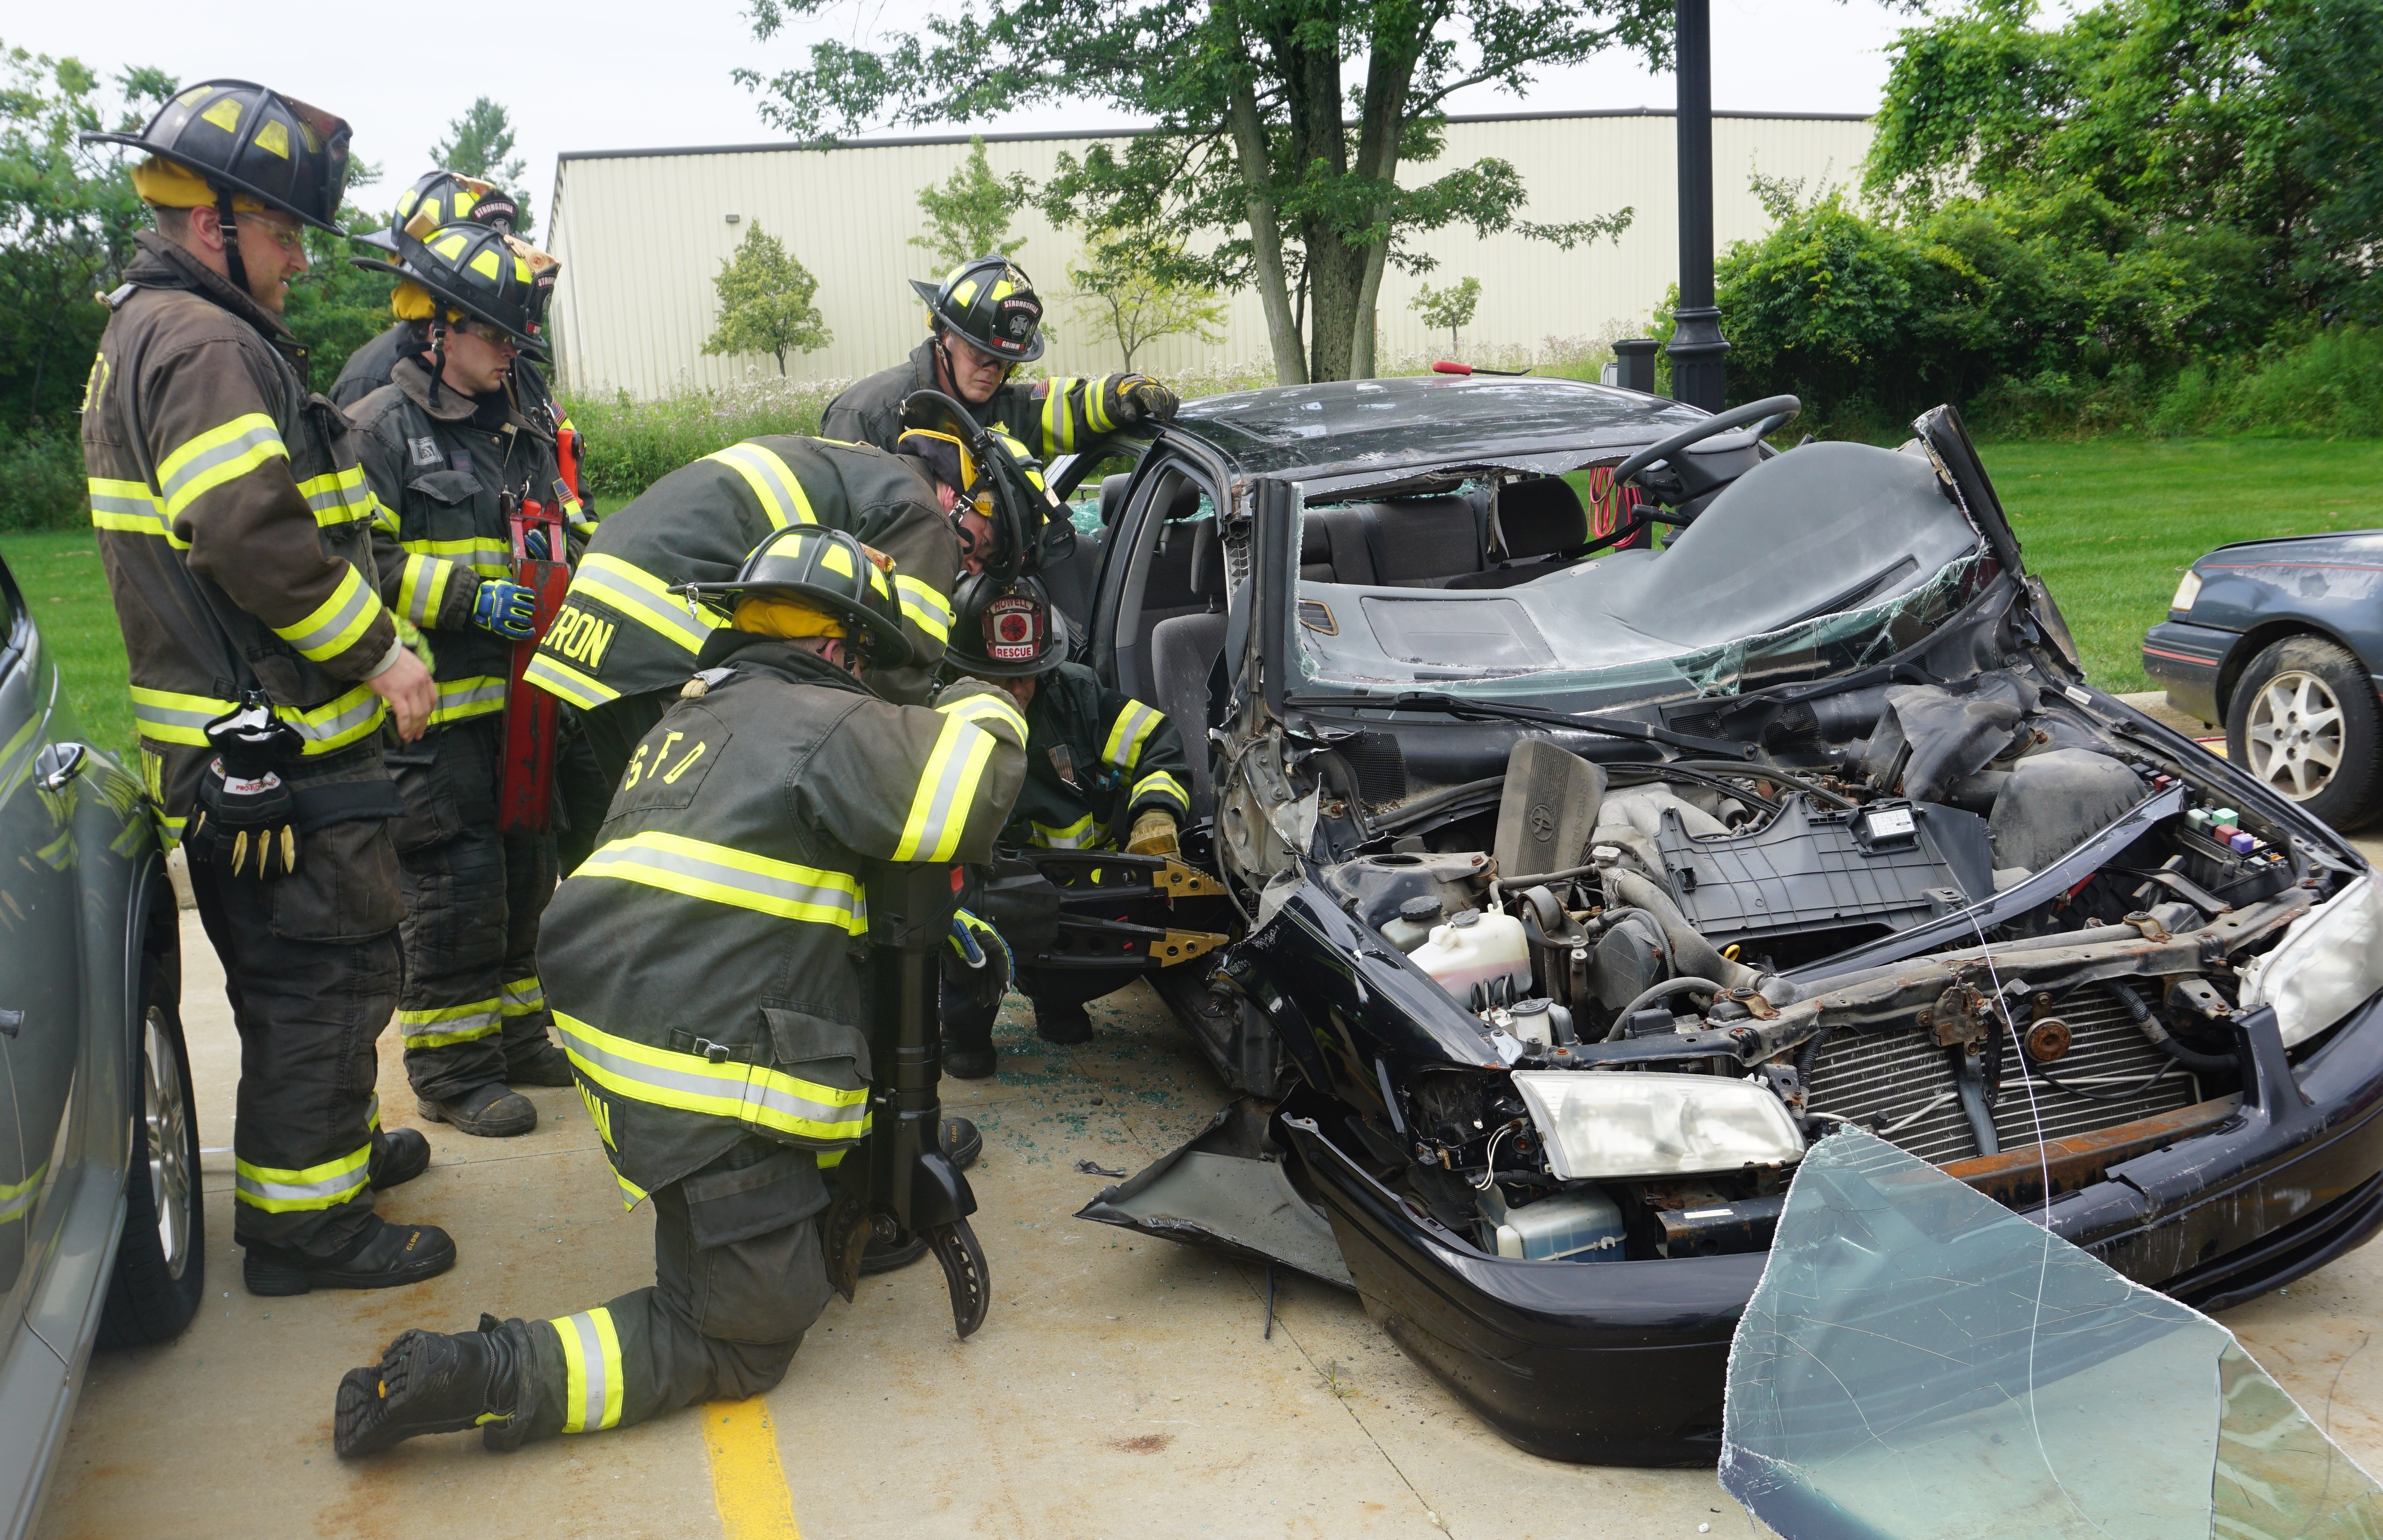 Strongsville's on the Cutting Edge with New Extrication Tool